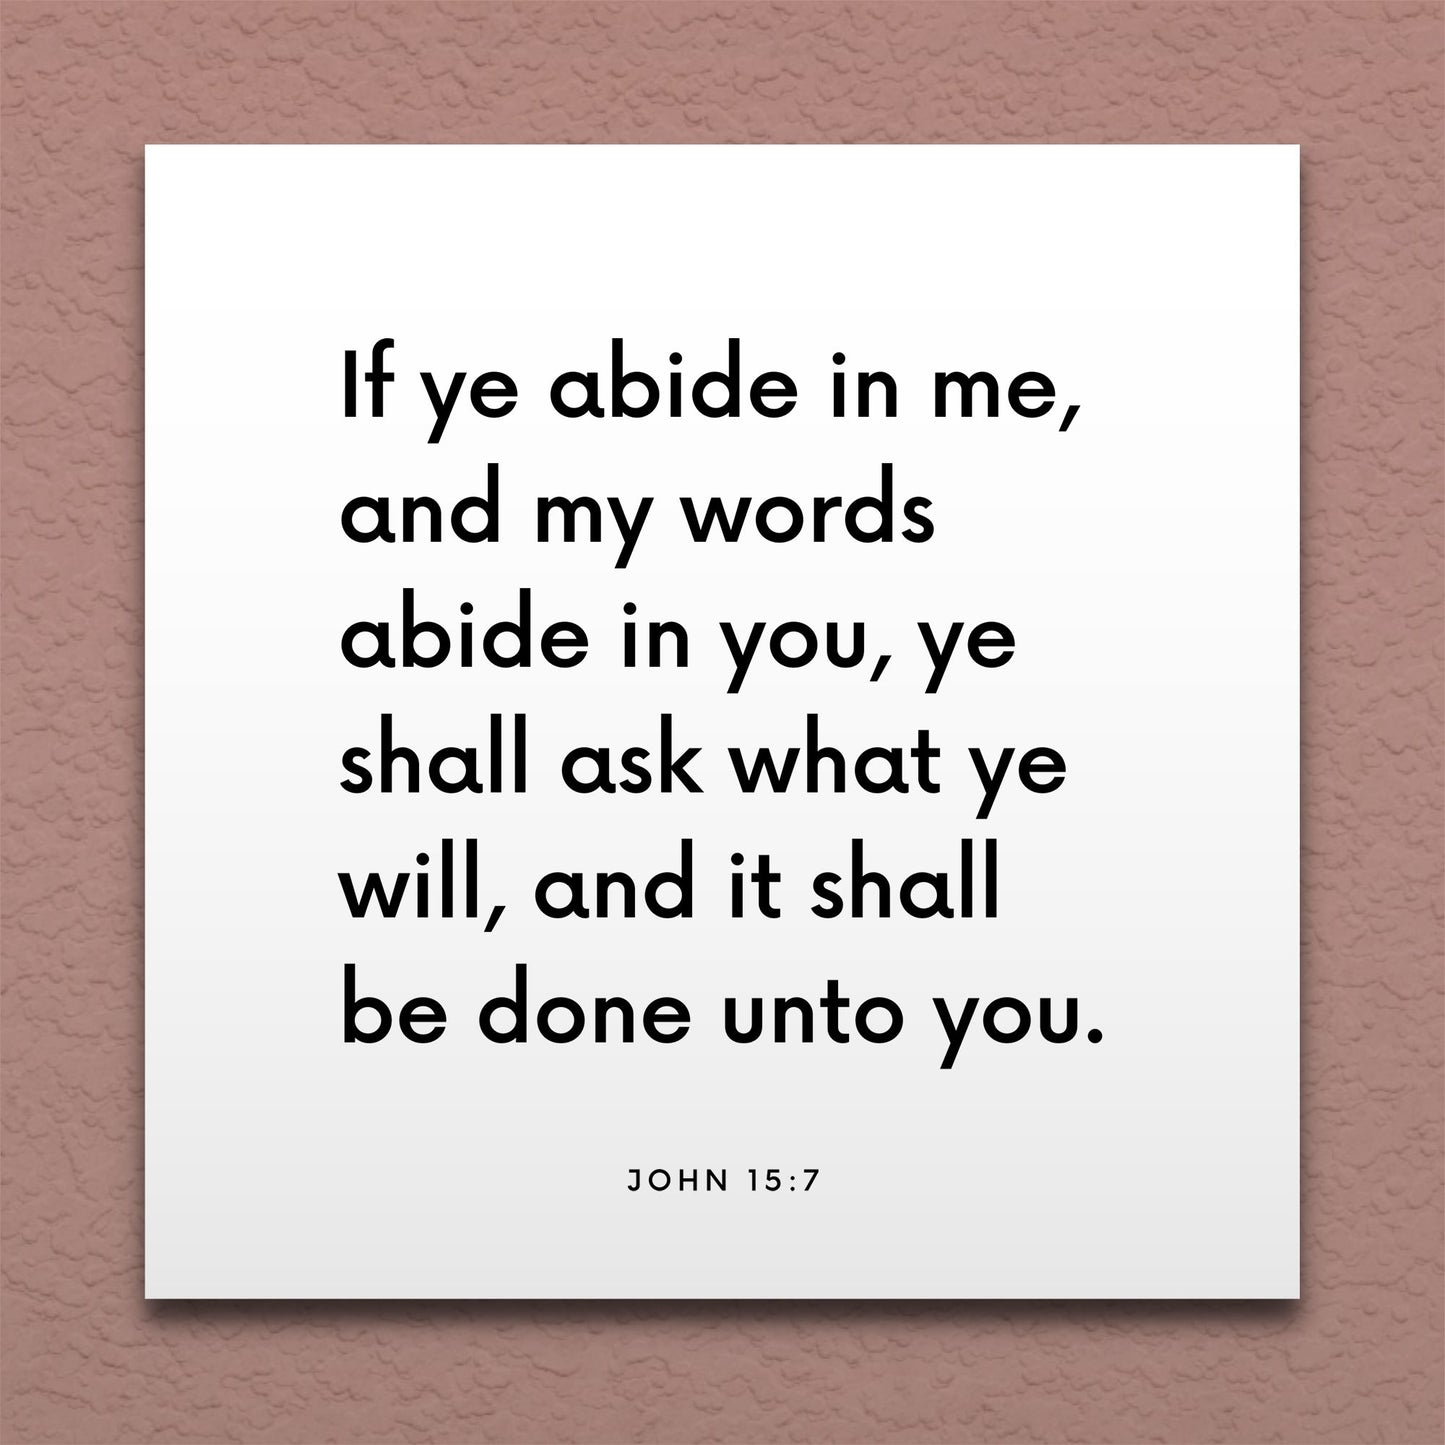 Wall-mounted scripture tile for John 15:7 - "Ask what ye will, and it shall be done unto you"